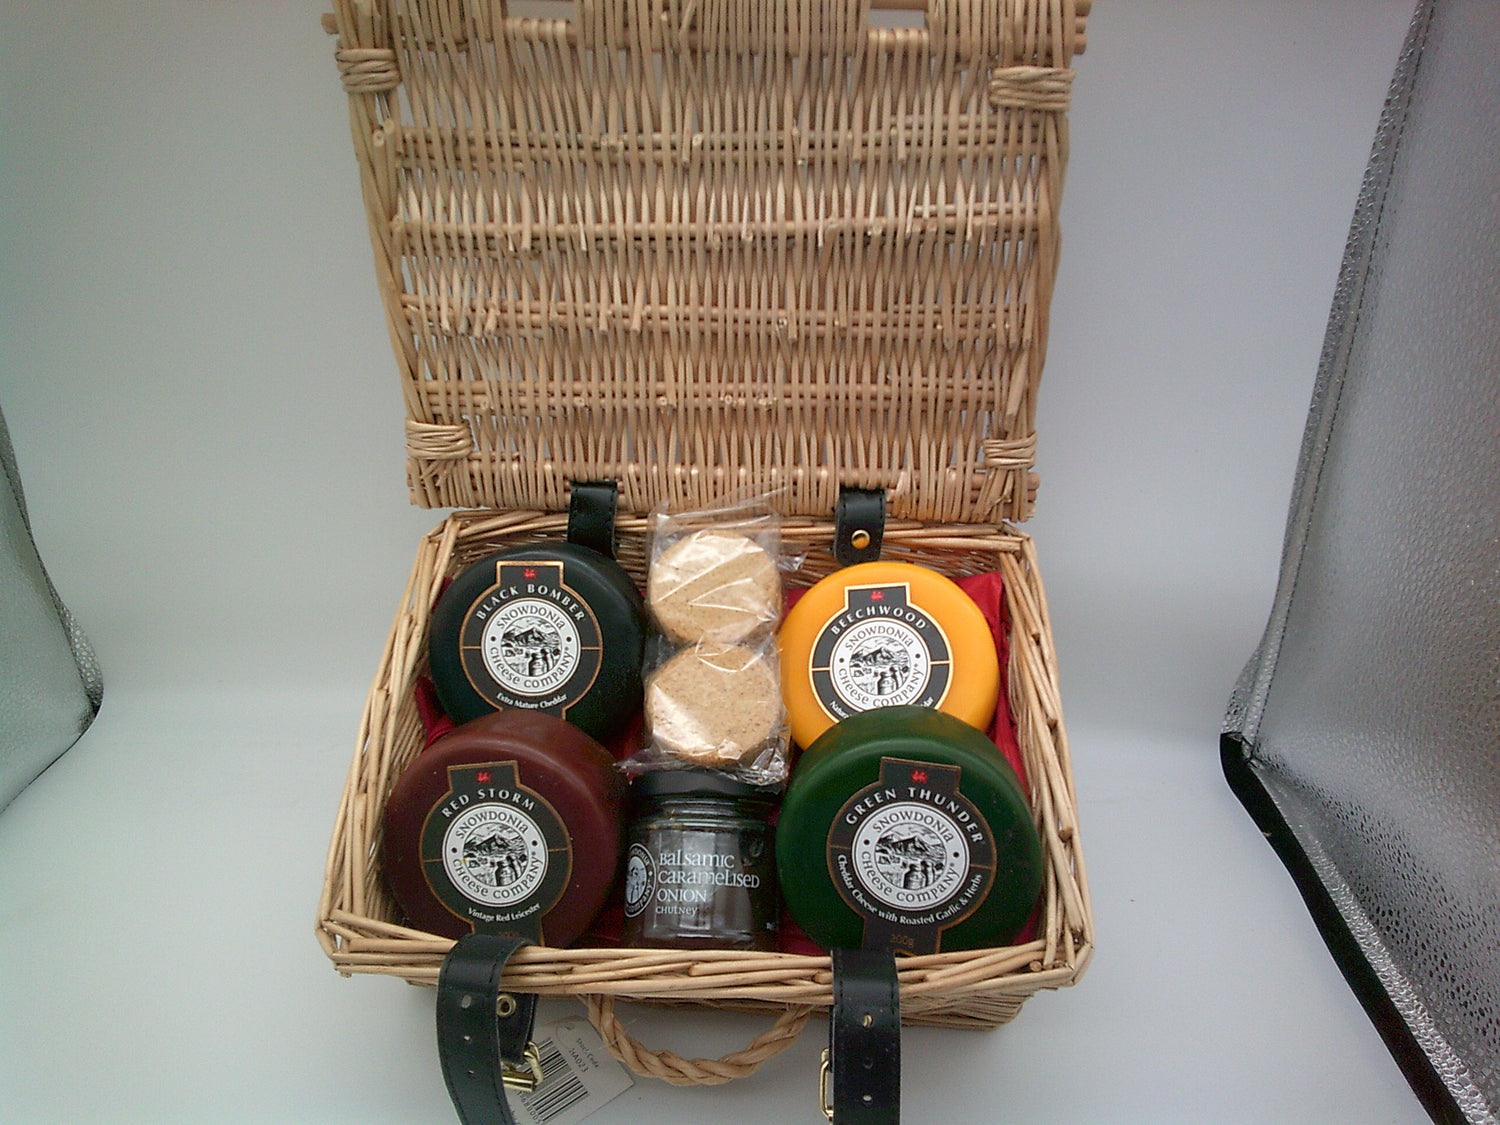 Cheese Hampers